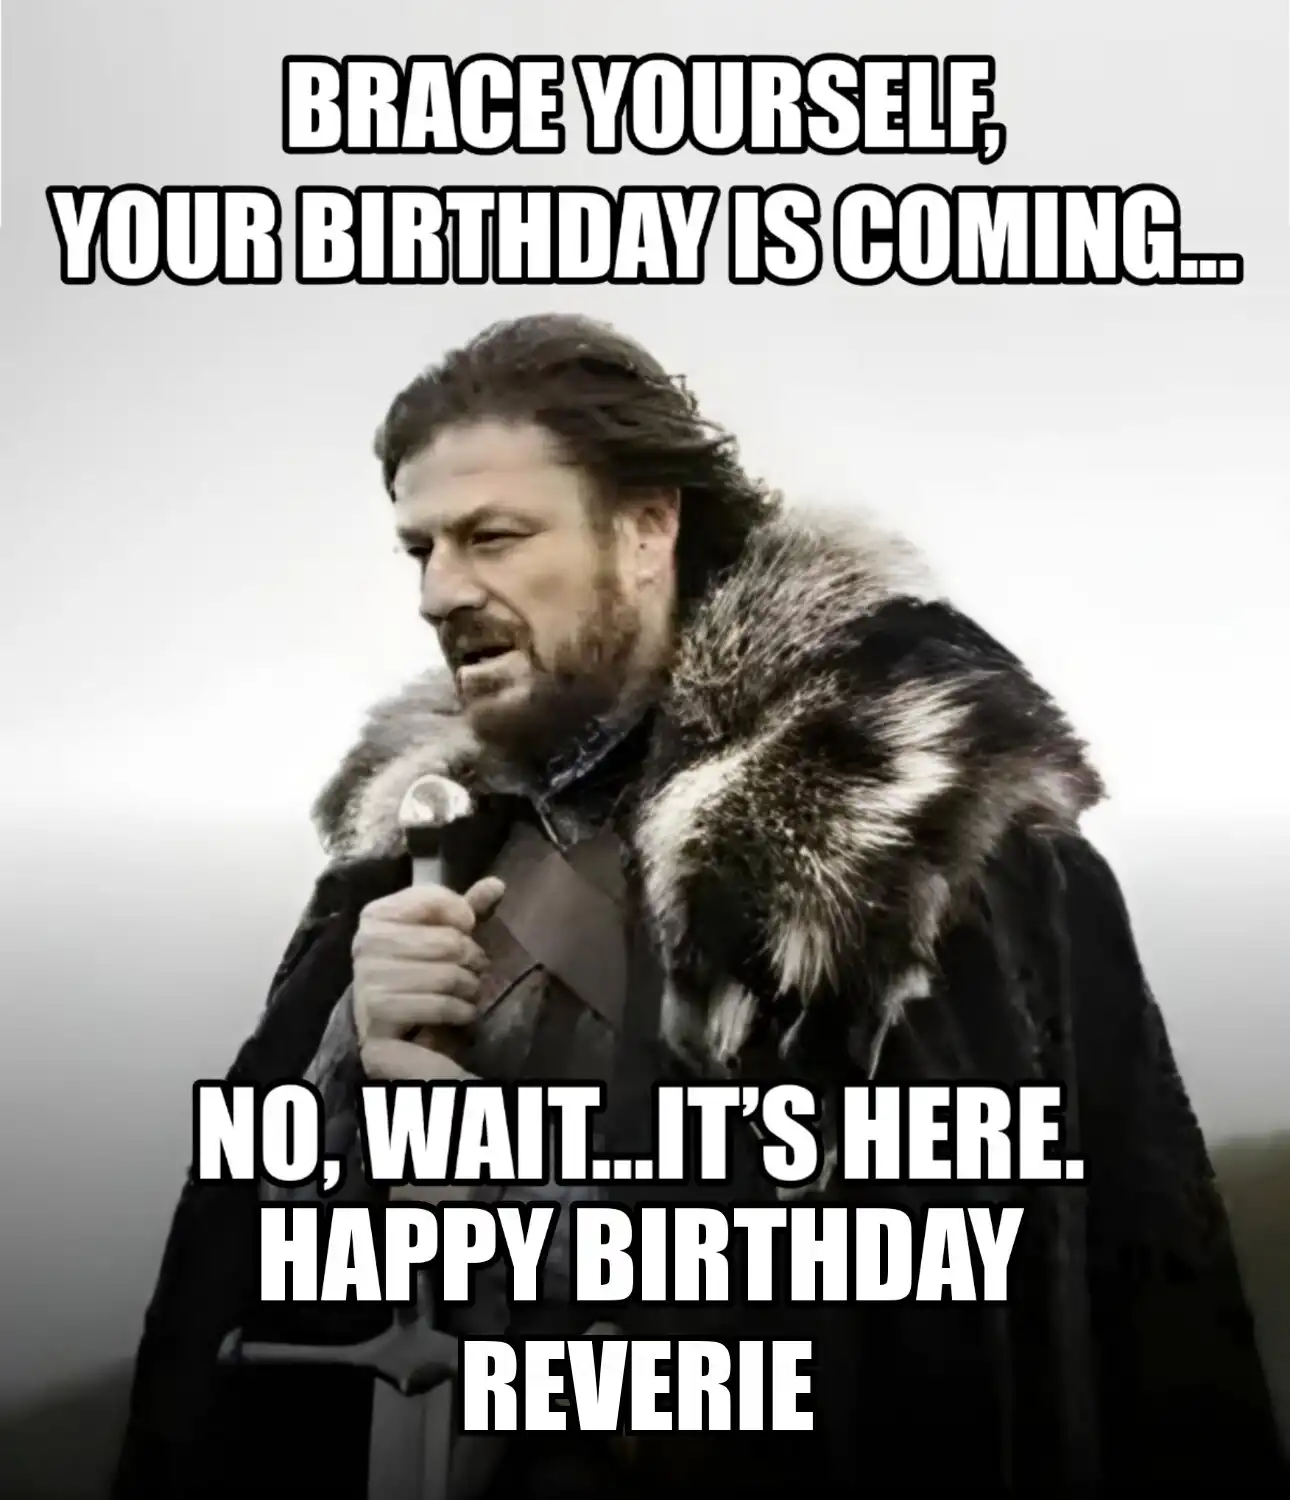 Happy Birthday Reverie Brace Yourself Your Birthday Is Coming Meme